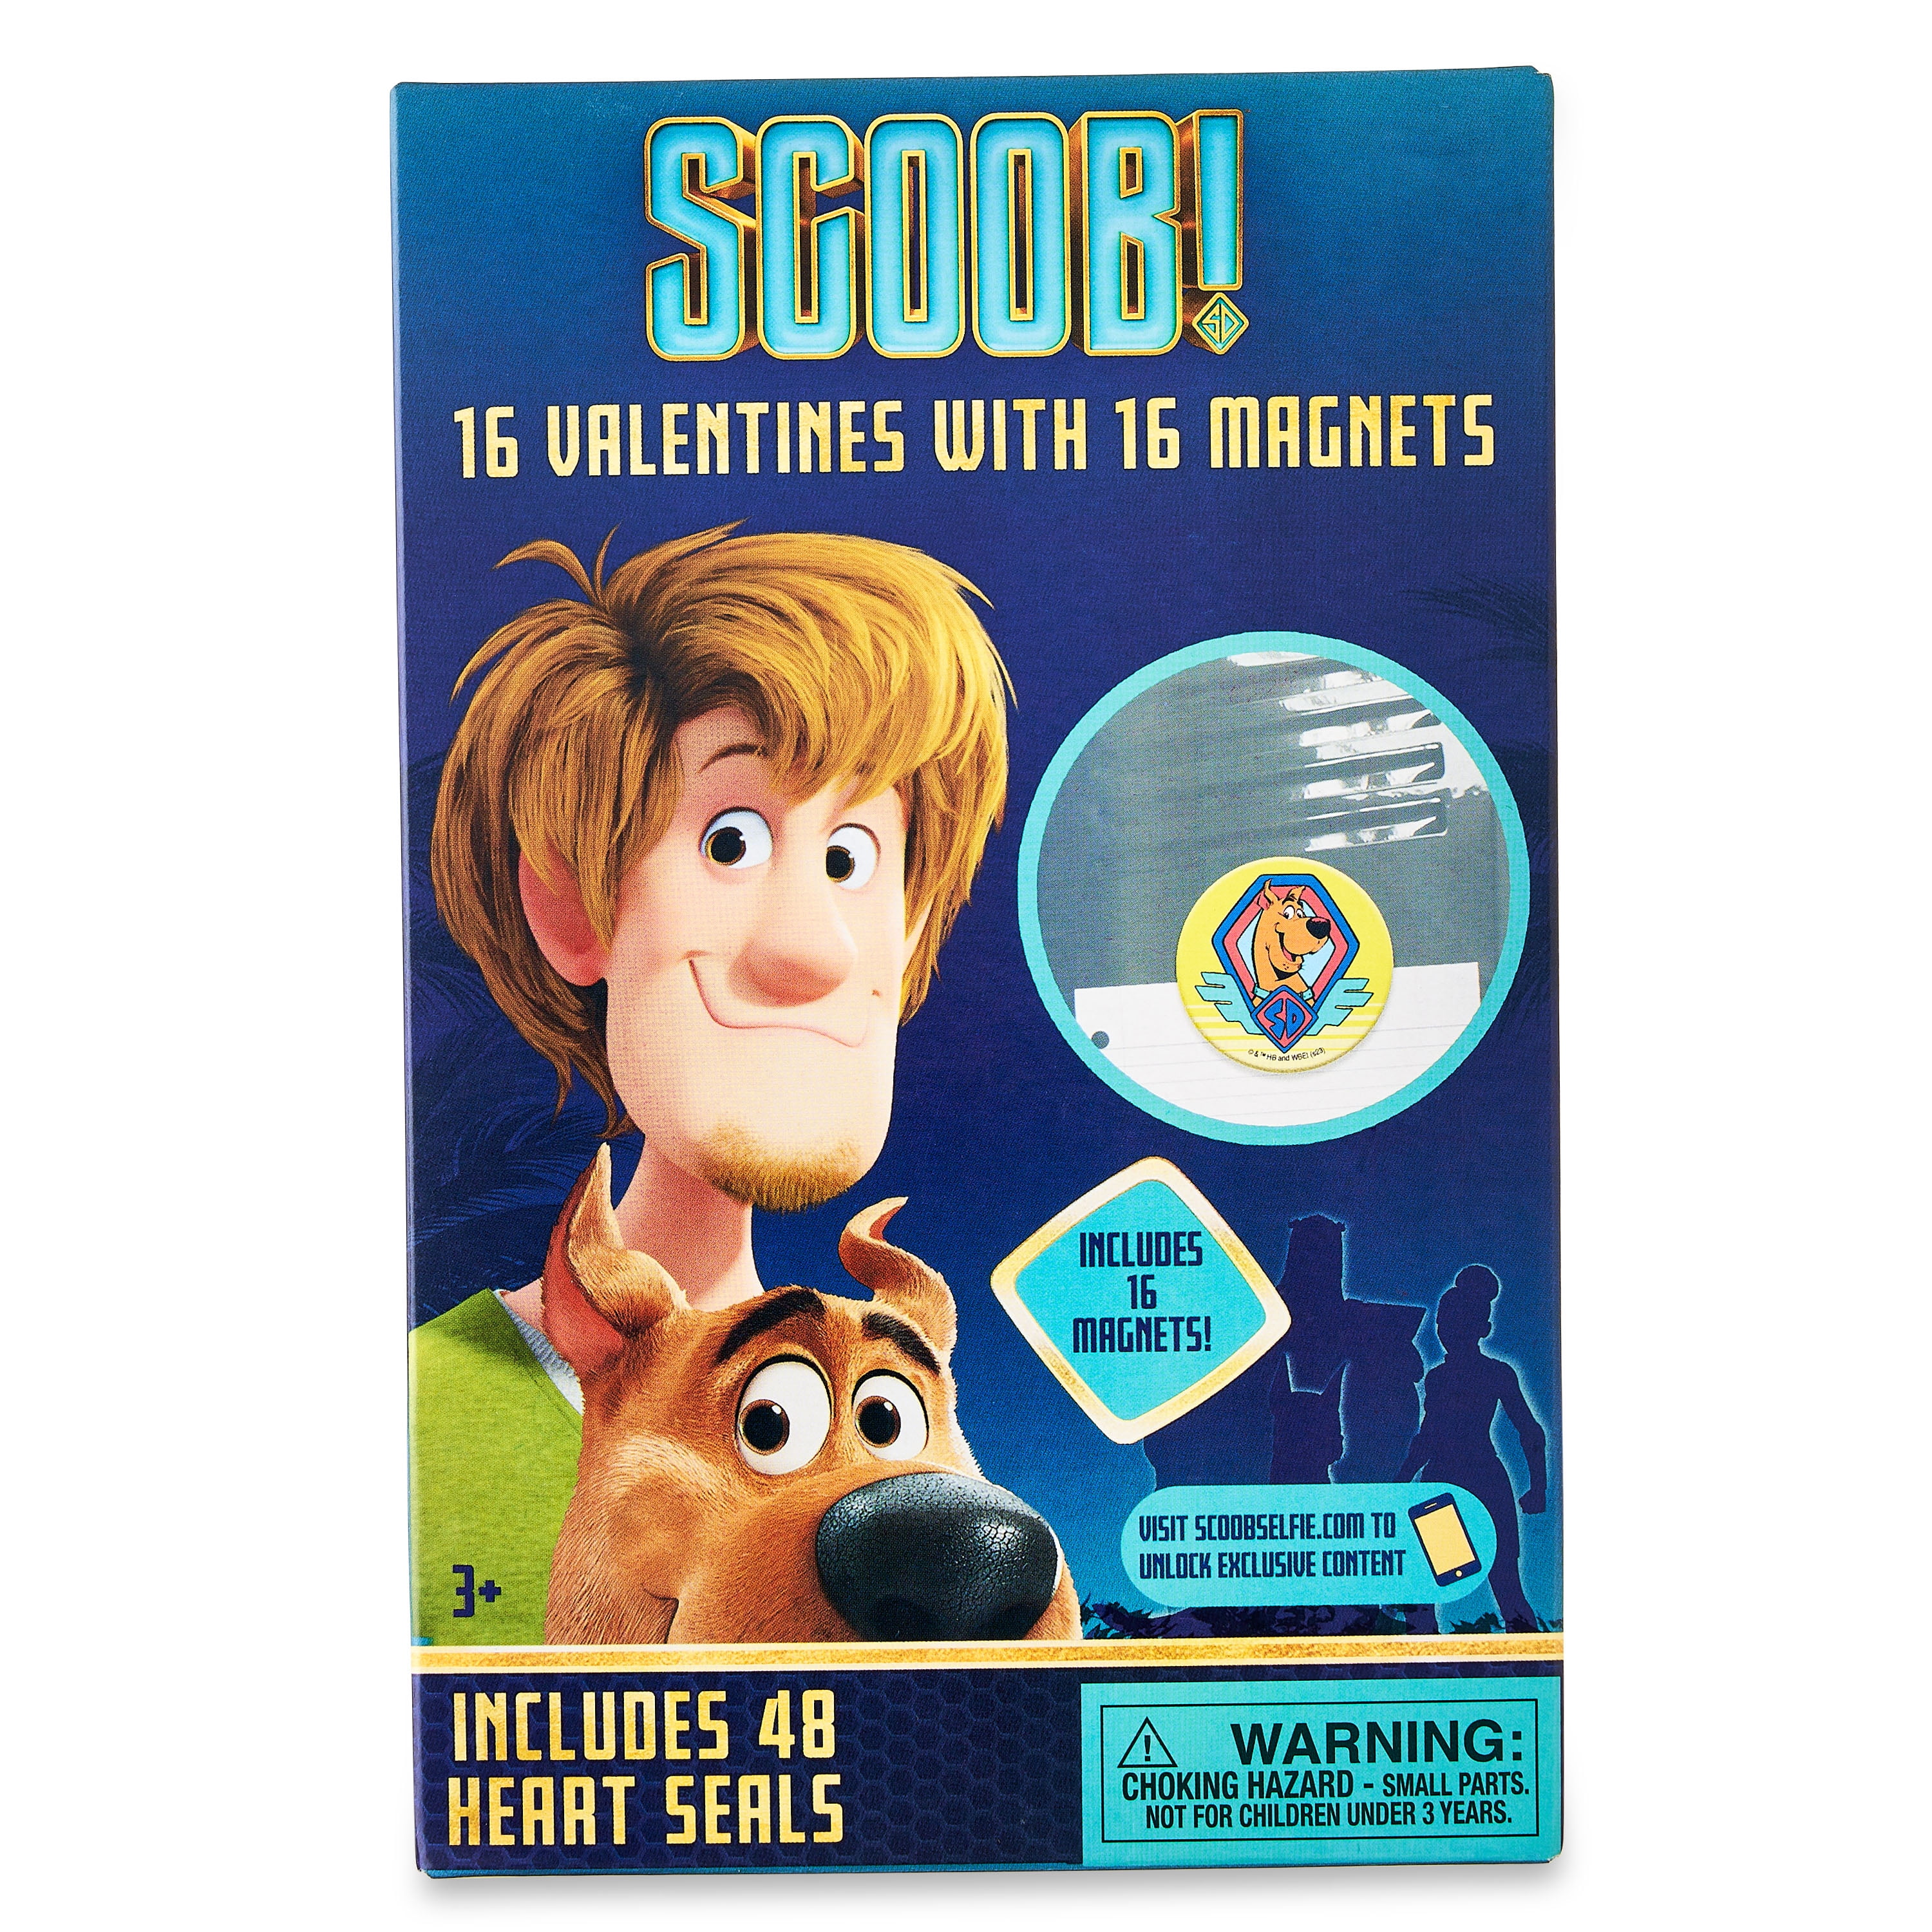 Scooby-Doo Way To Celebrate Scooby Doo Valentine's Day Paper Exchange Cards, Kiddie Cards, Magnet, 16 Count, Multi-Color, Classroom